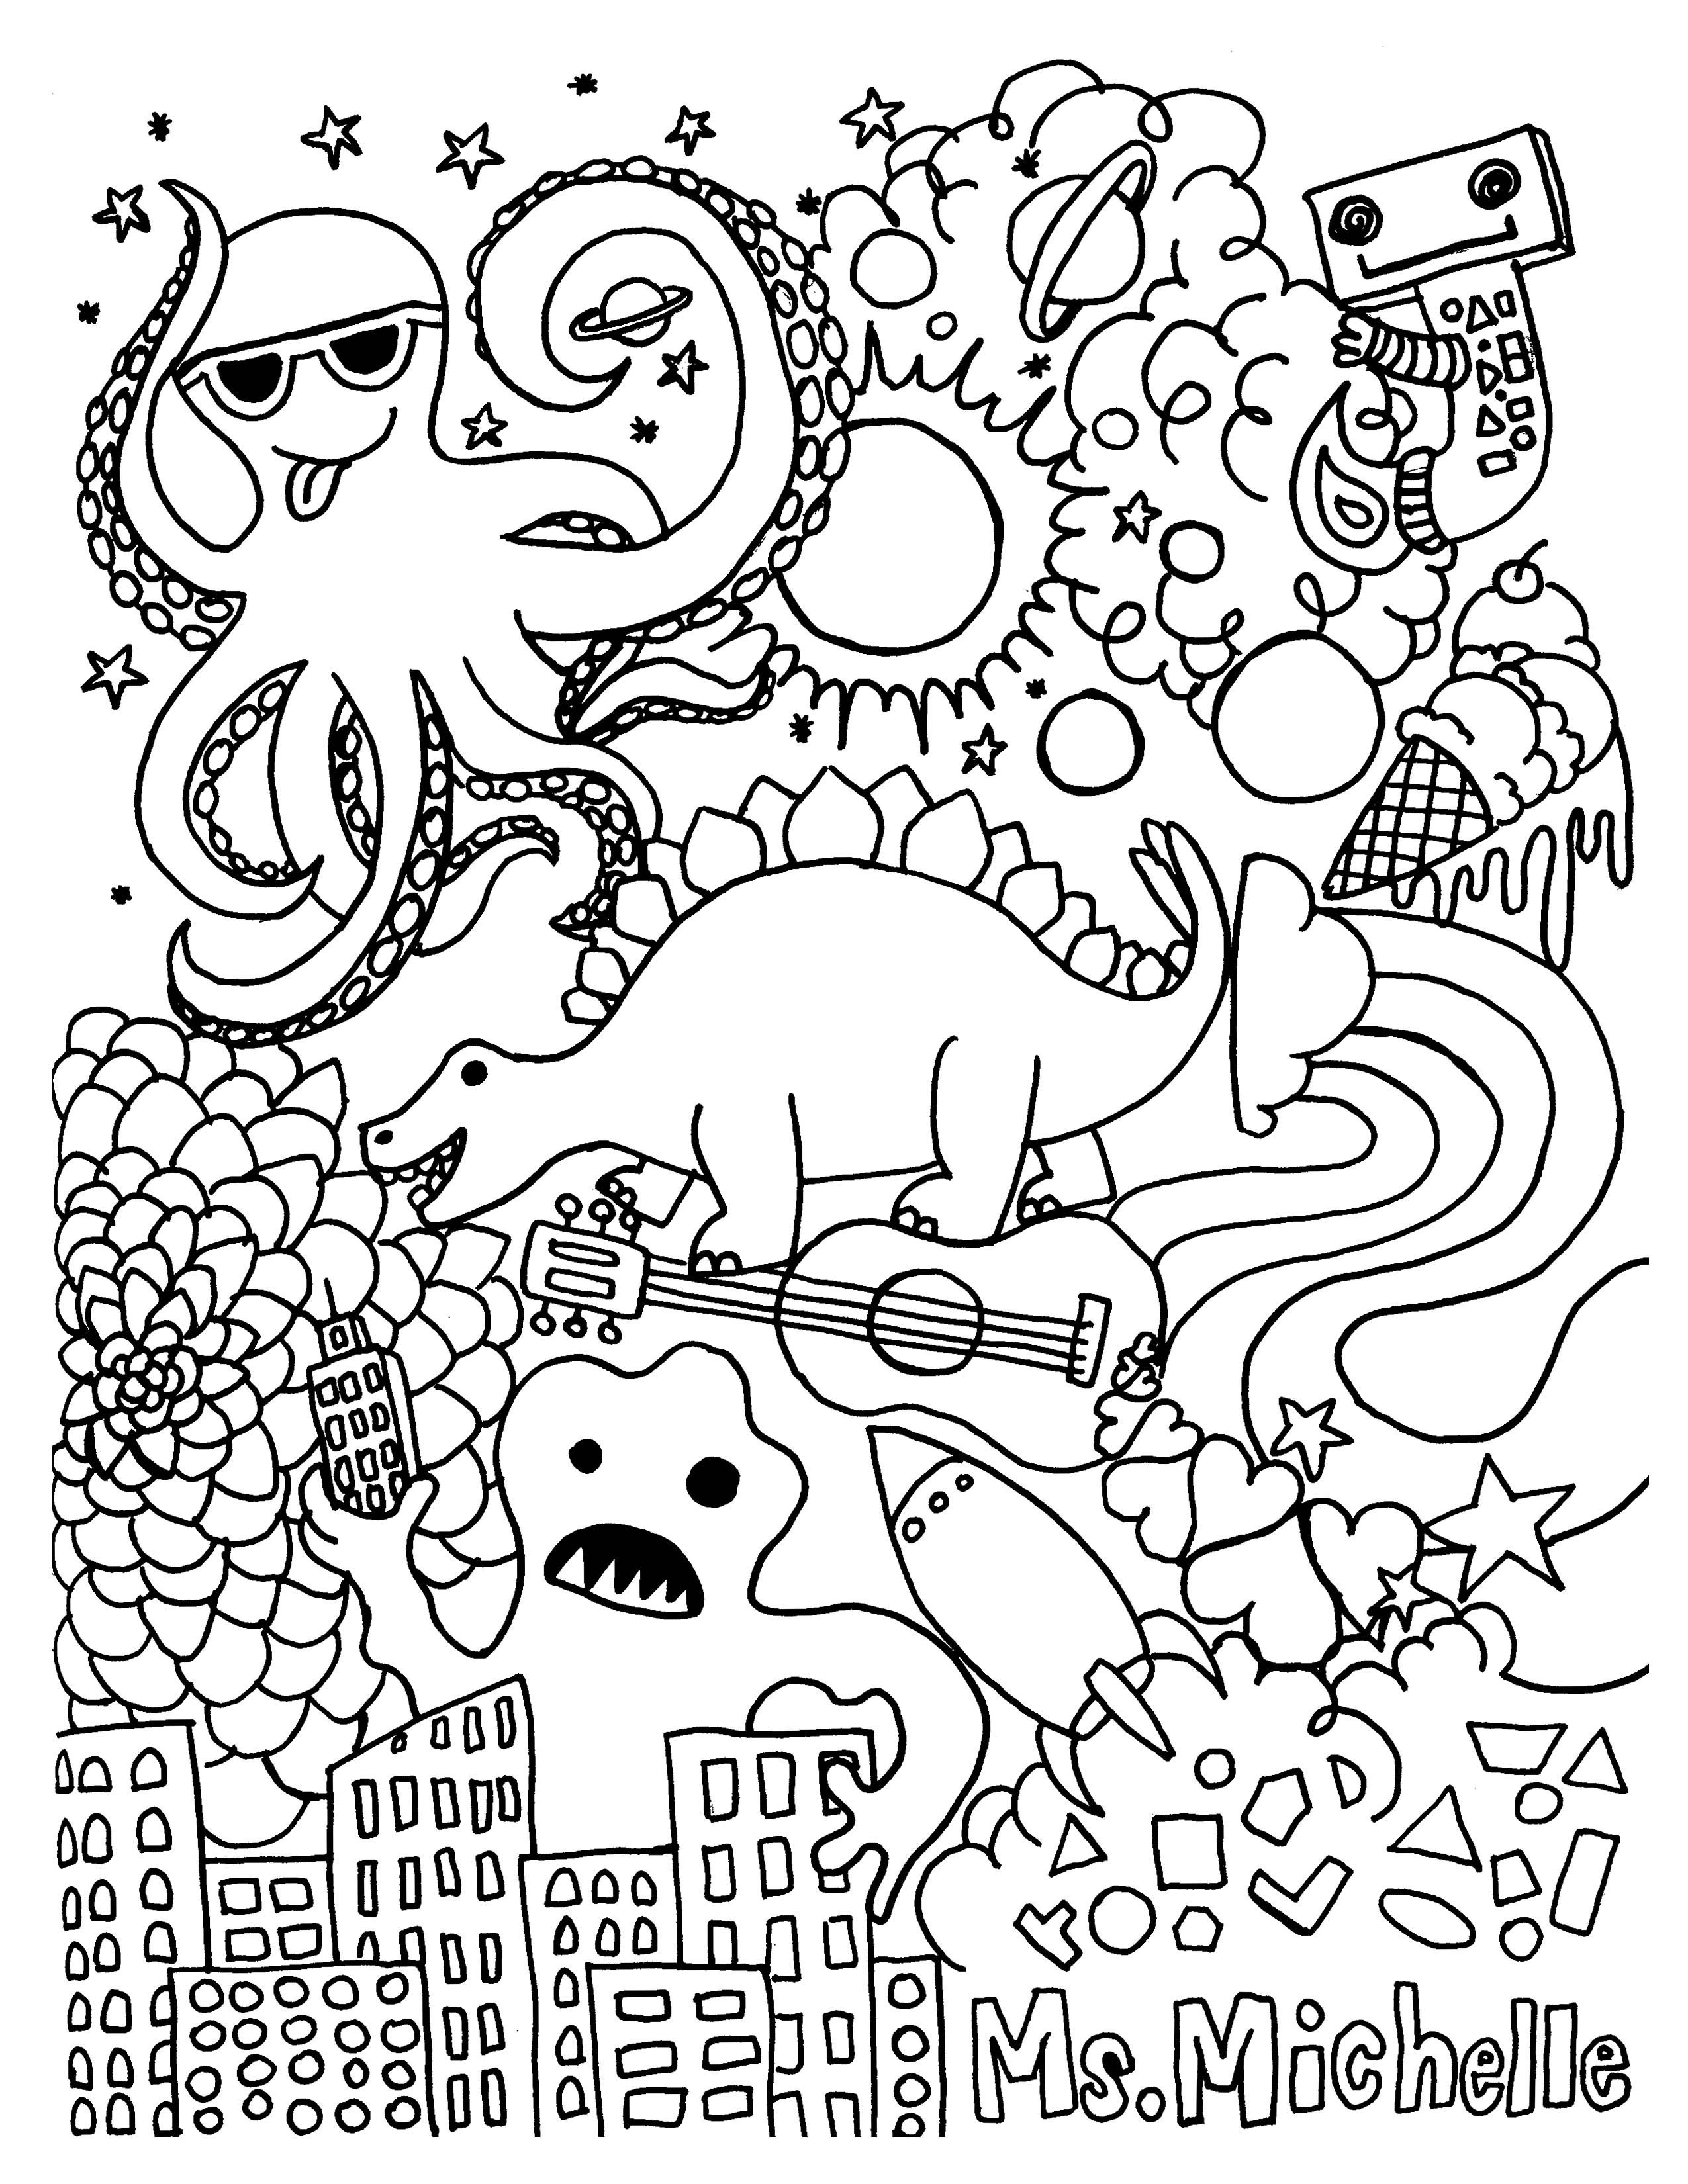 Save The Earth Coloring Pages Save The Earth Coloring Pages Fresh Printable Earth Coloring Pages